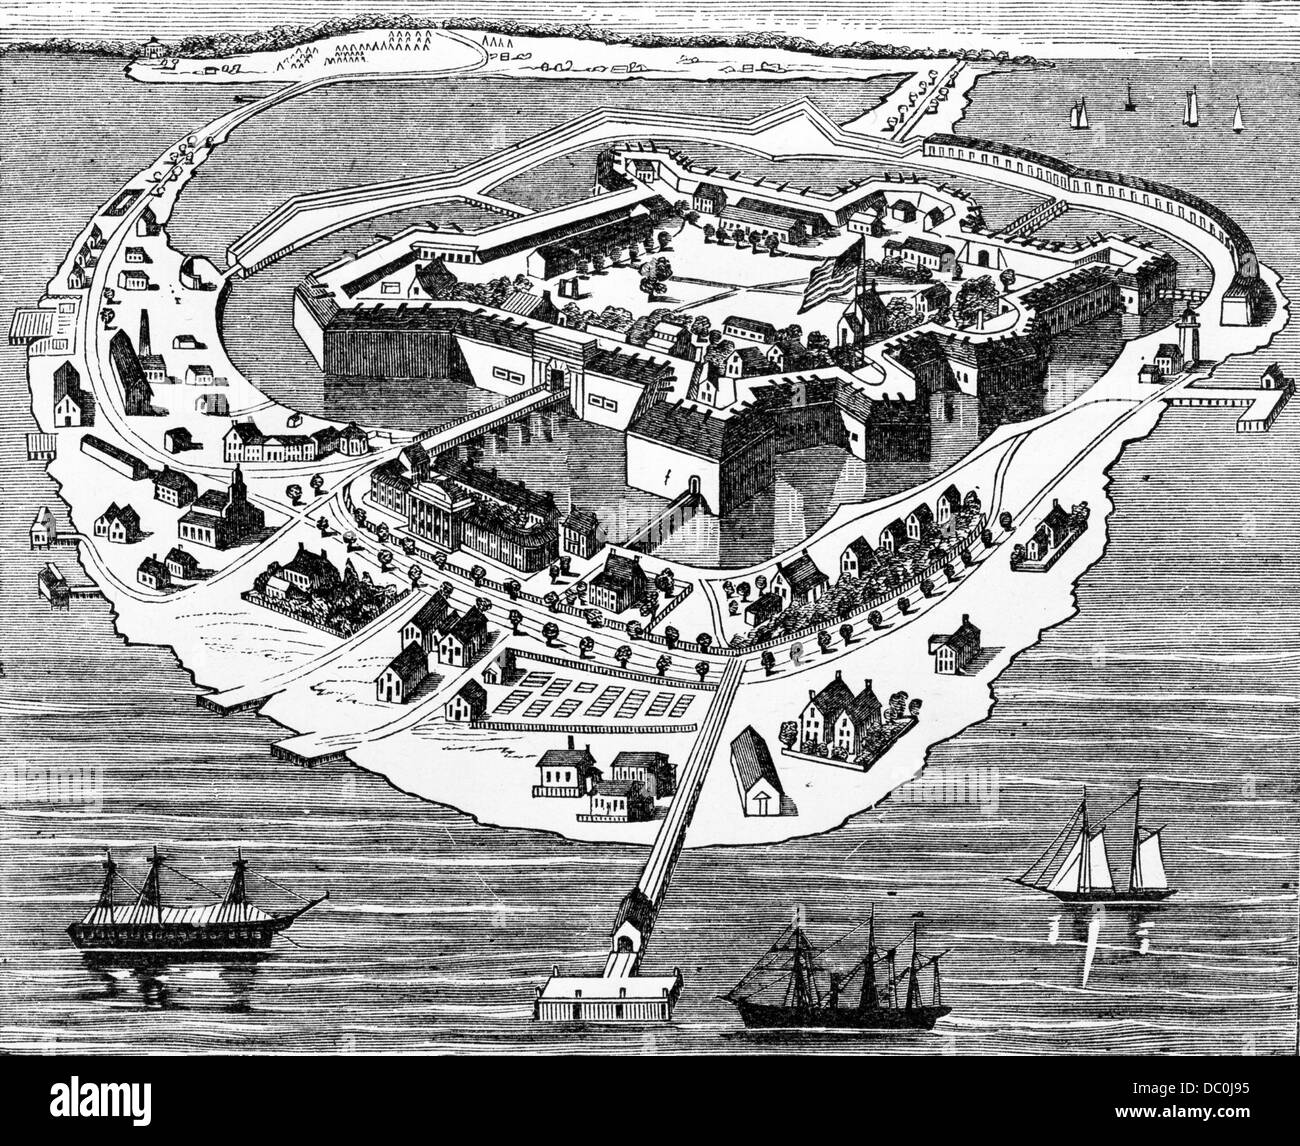 1800s 1860s DRAWING LAYOUT FORT MONROE AT OLD POINT COMFORT HELD BY FEDERAL UNION FORCES THROUGHOUT THE ENTIRE CIVIL WAR Stock Photo